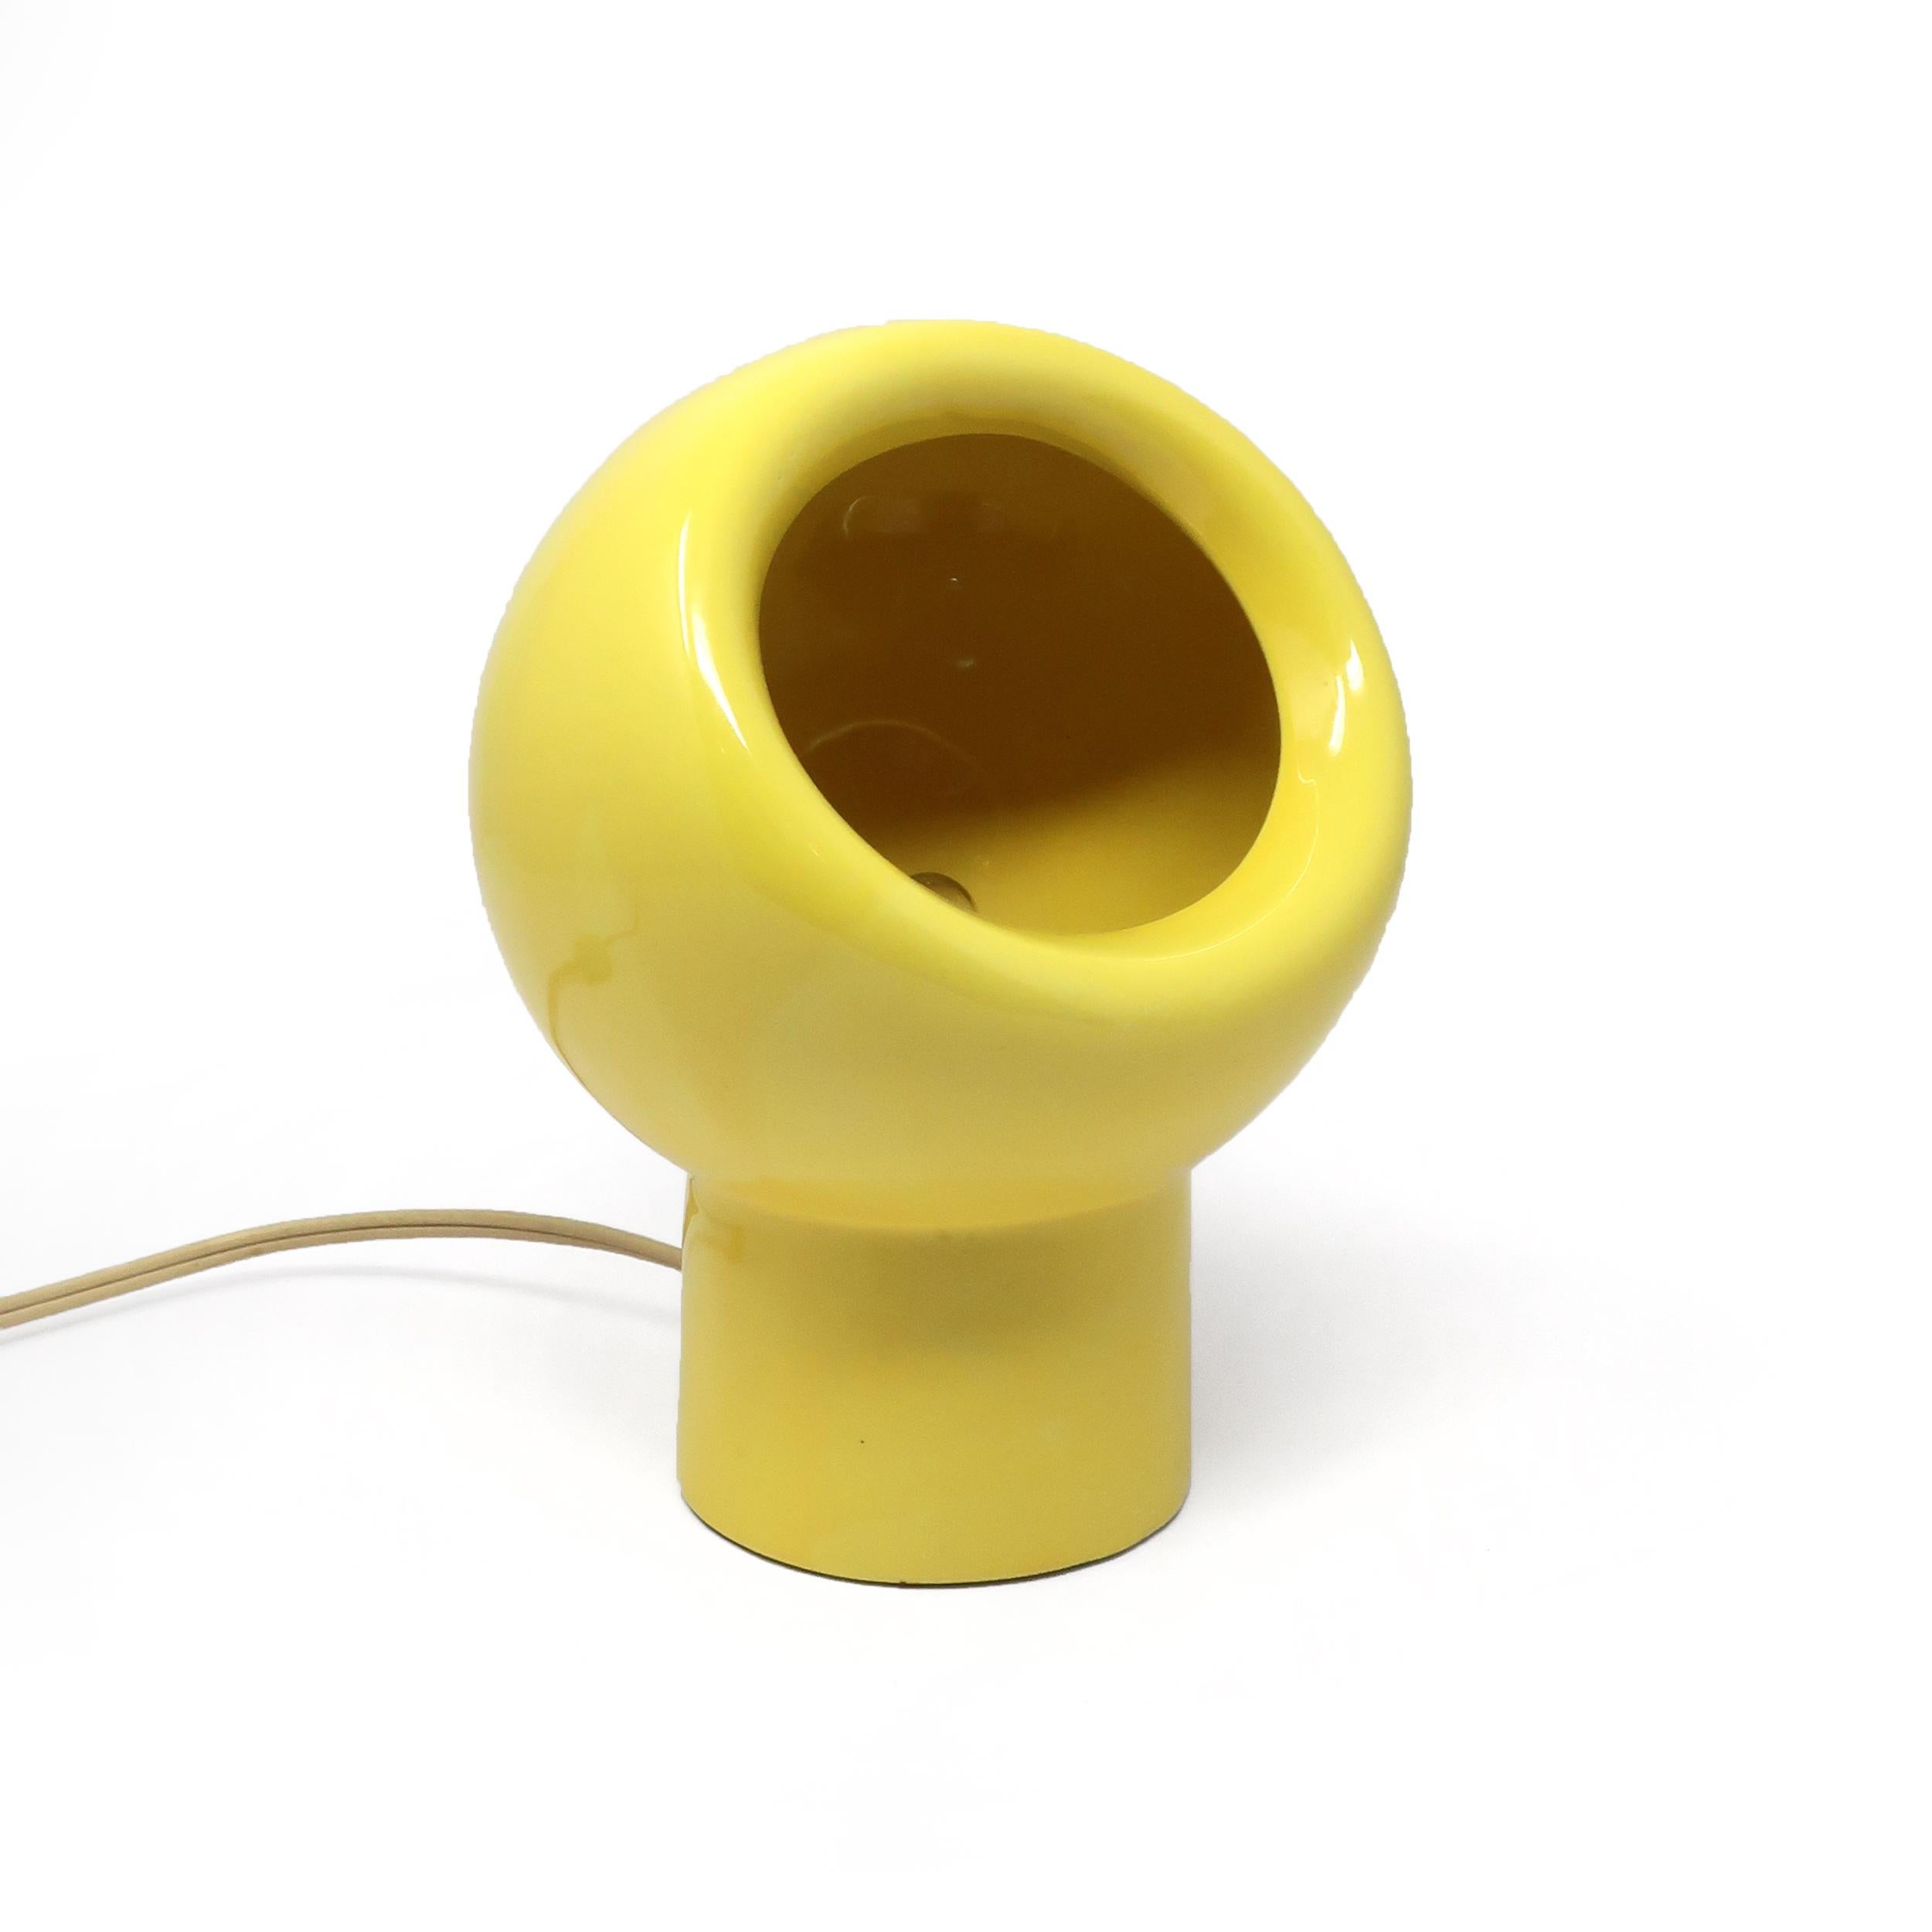 A very cool Mid-Century Modern ceramic eyeball table lamp in a bright yellow. Takes a single bulb and switch is on the cord. In good vintage condition with wear consistent with age and use.
Measures:
5.5